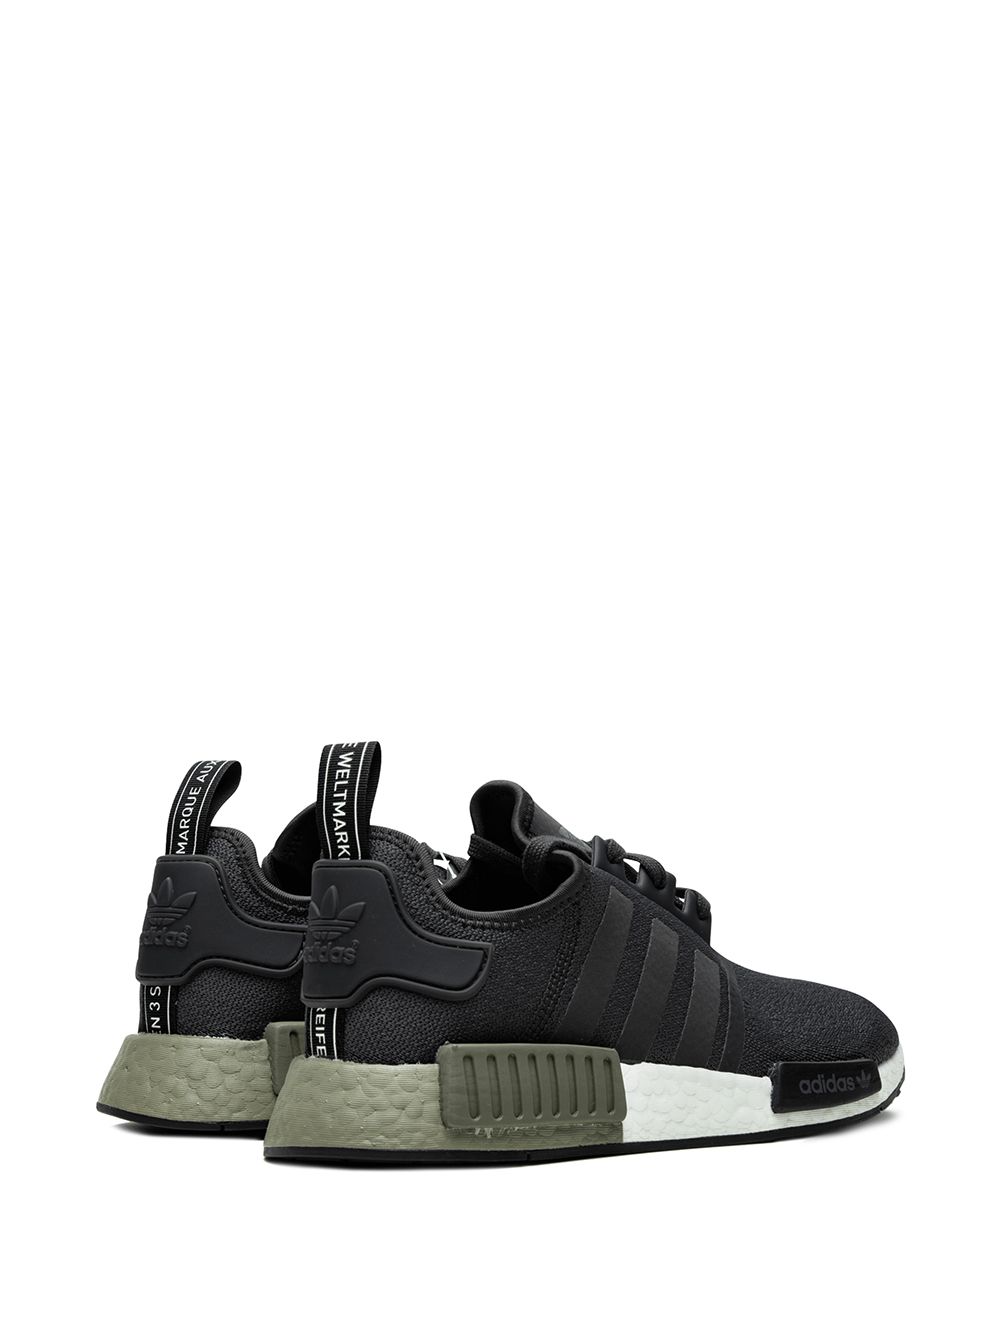 adidas nmd r1 carbon trace cargo